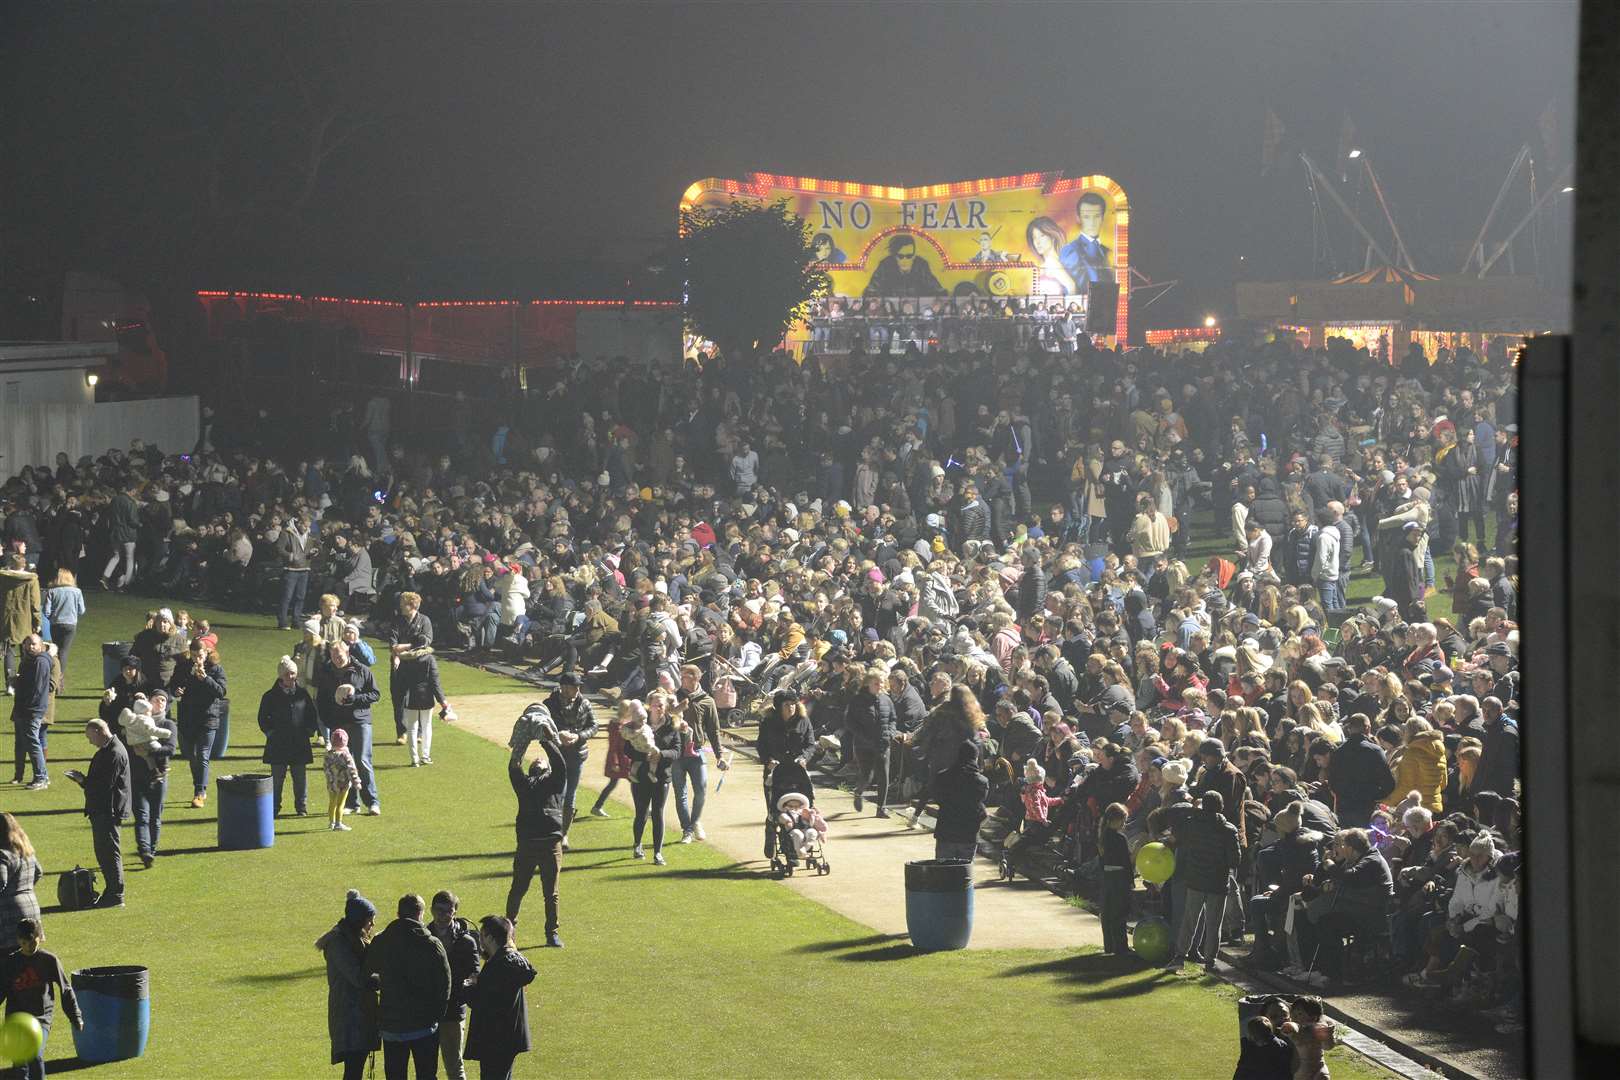 Huge crows gather at the Spitfire Ground every year for the spectacular fireworks display